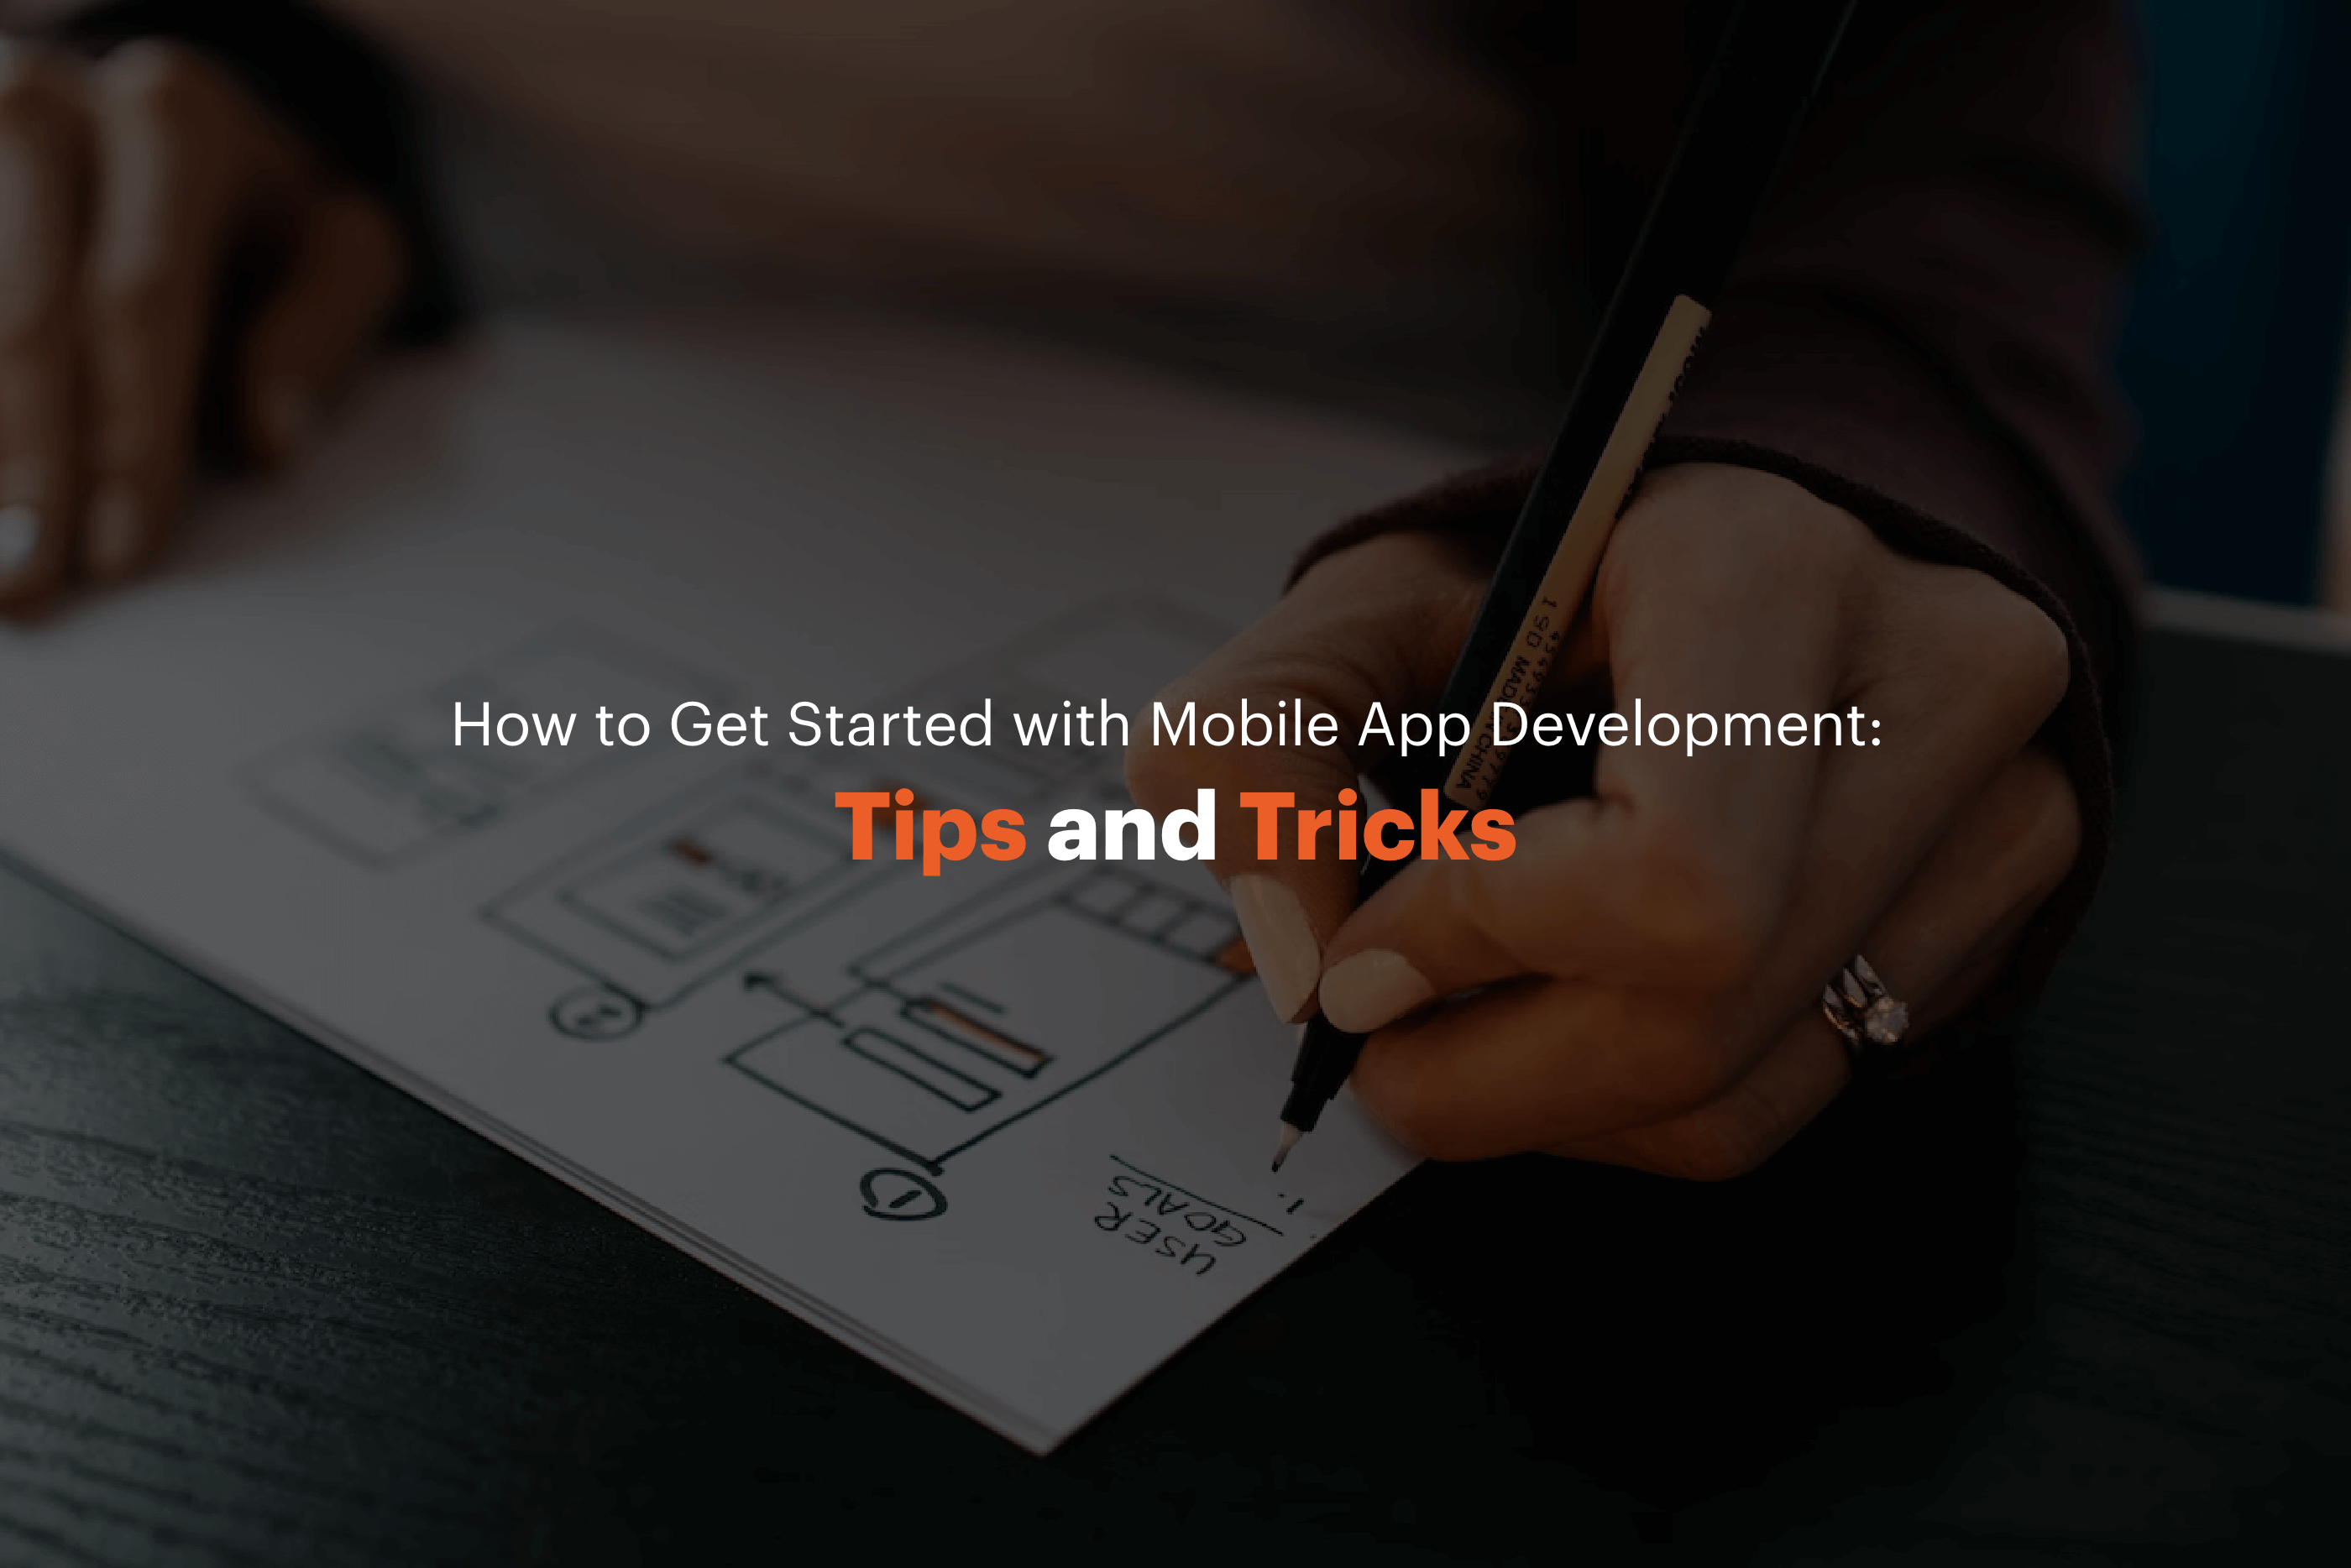 How to Get Started with Mobile App Development: Tips and Tricks